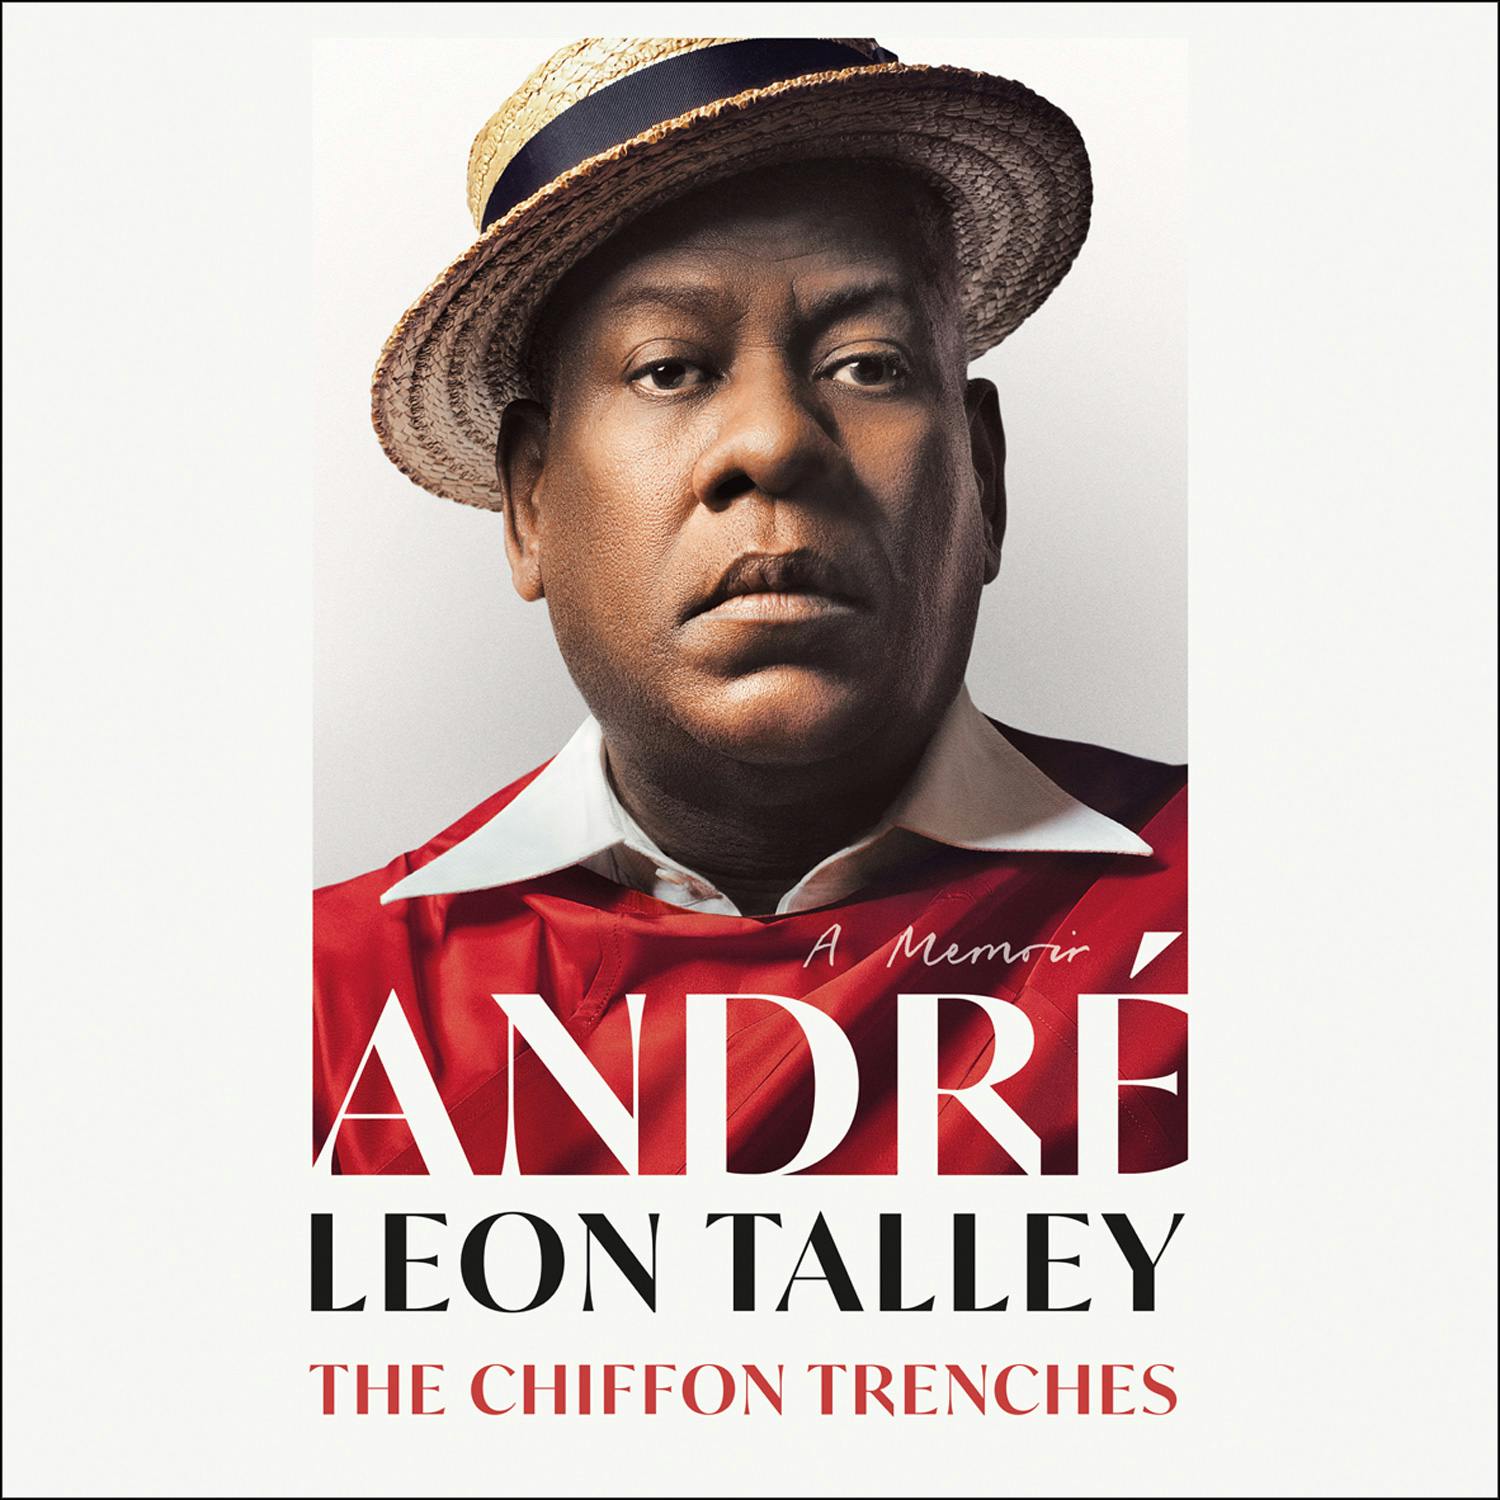 The Chiffon Trenches - Andre Leon Talley